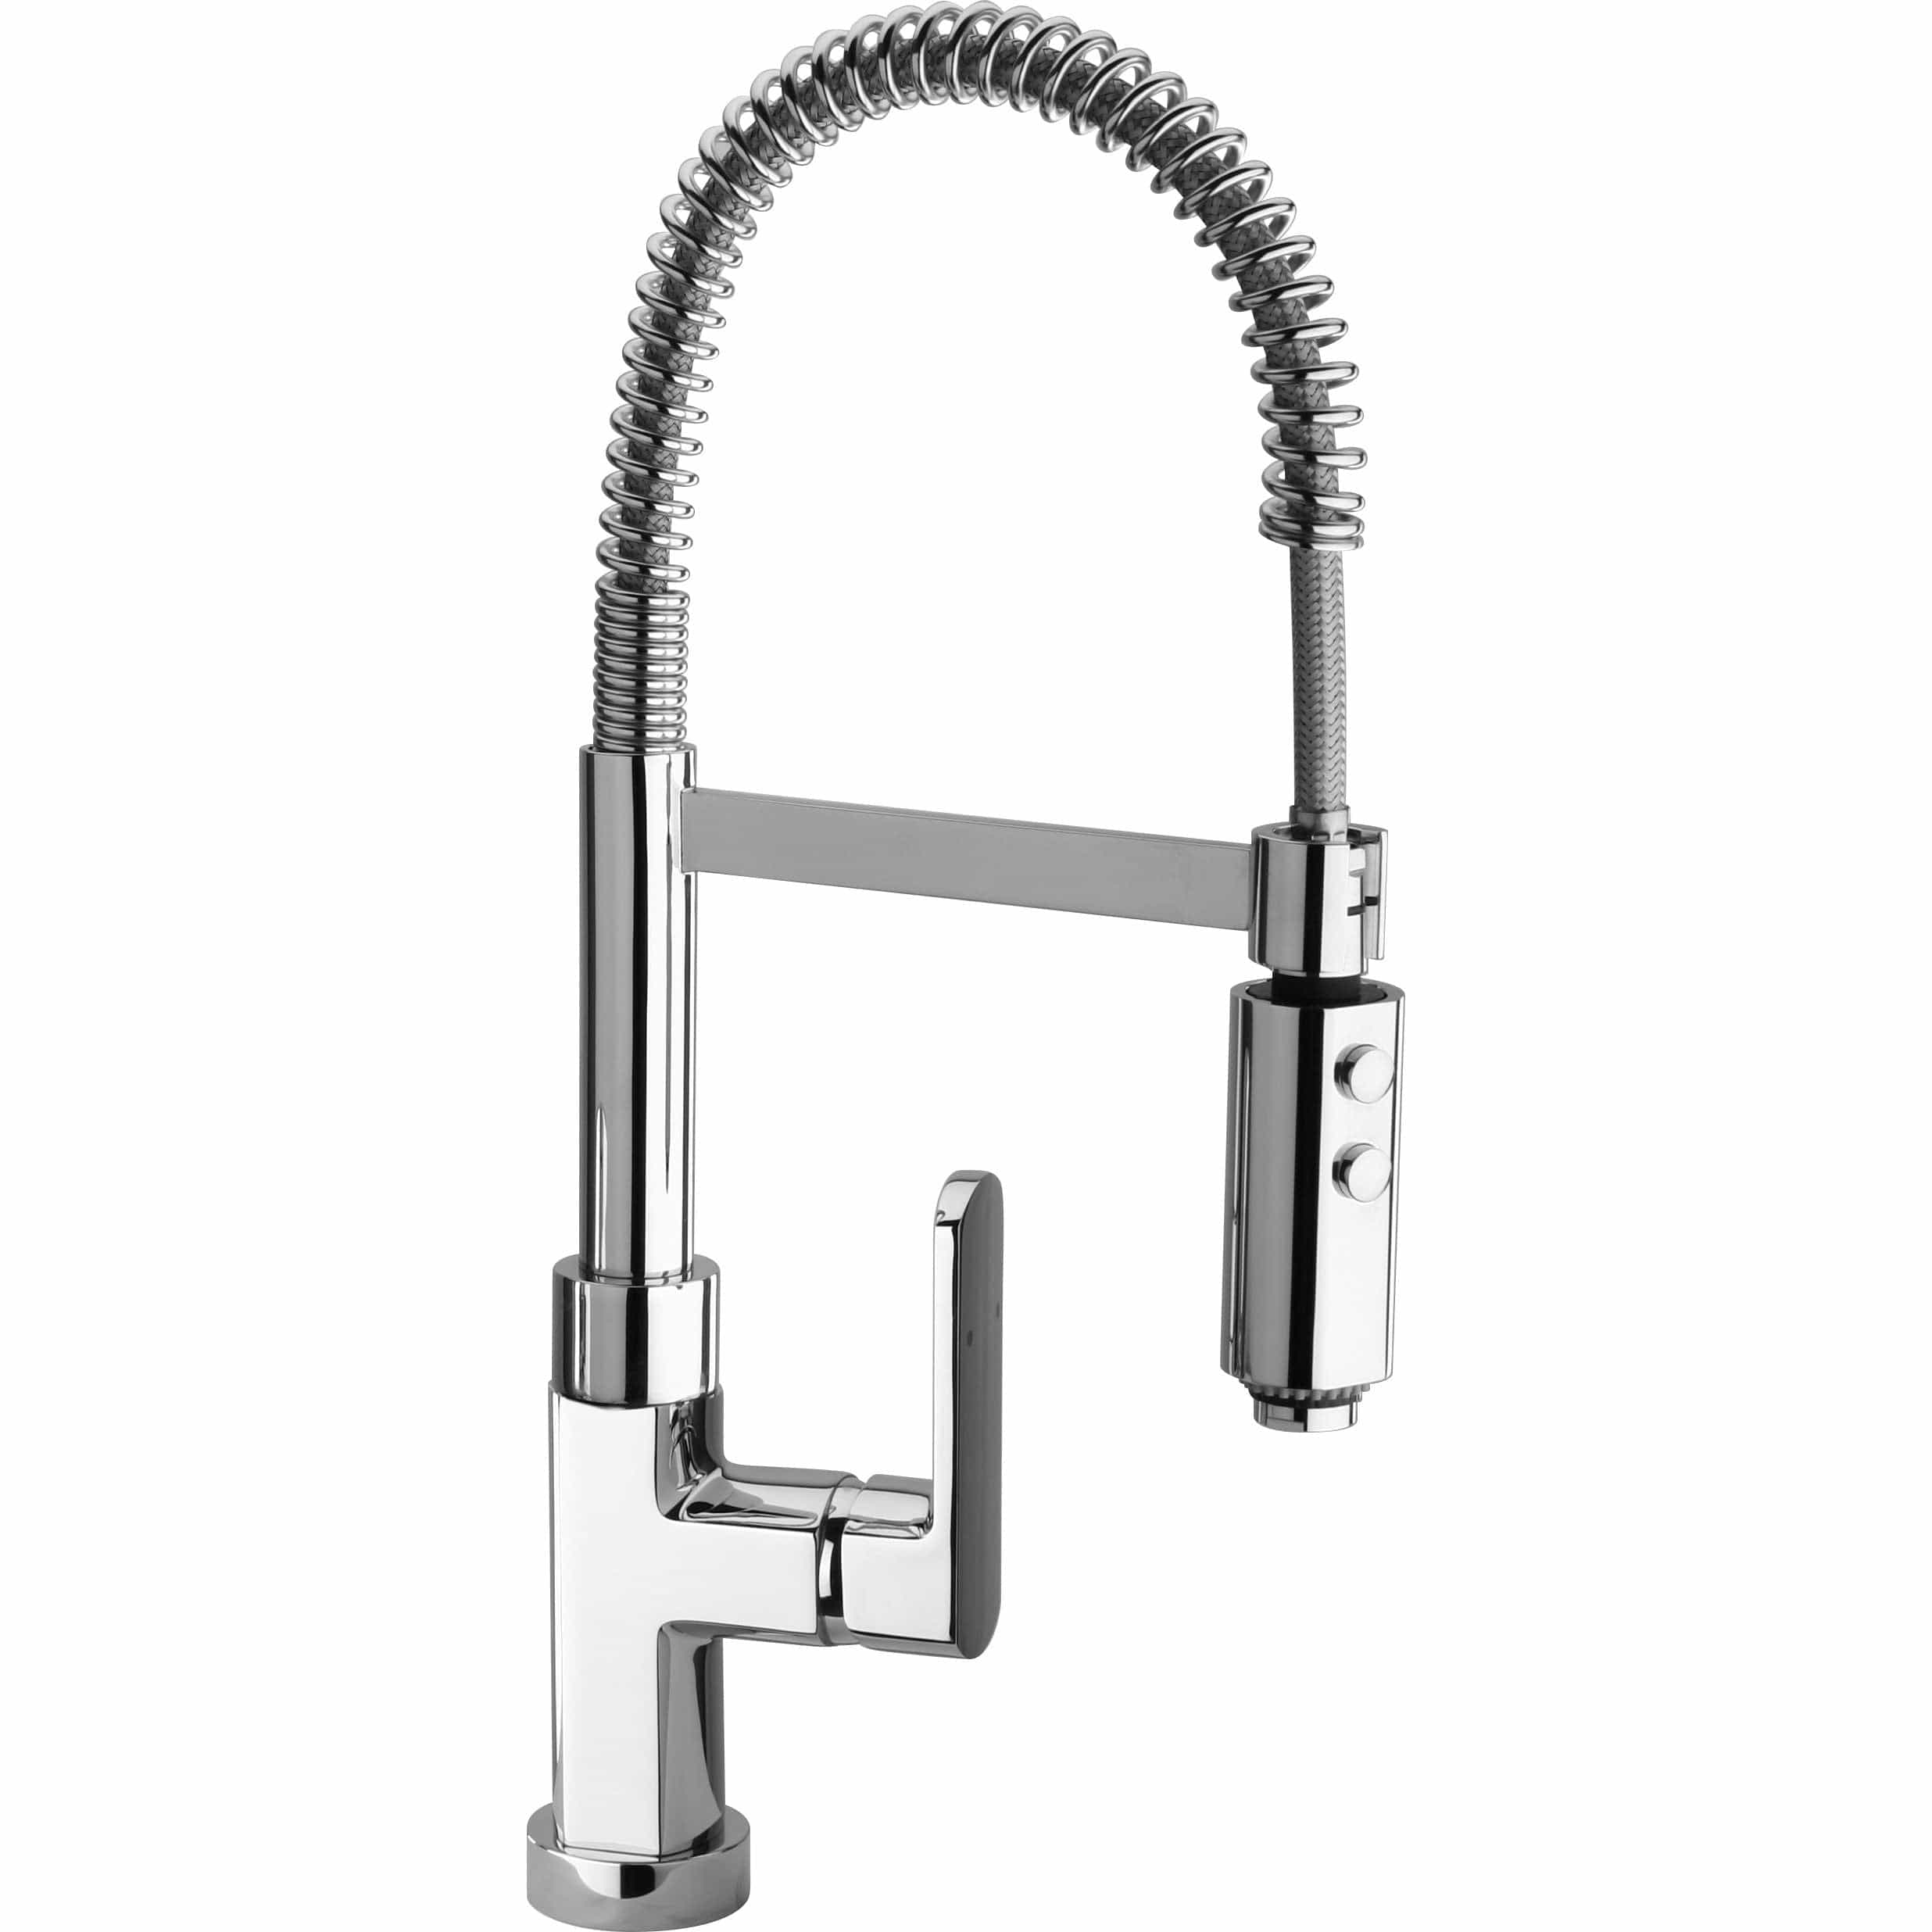 LATOSCANA Novello Single Handle Kitchen Faucet With Spring Spout, Chrome - 86CR557 - Manor House Sinks